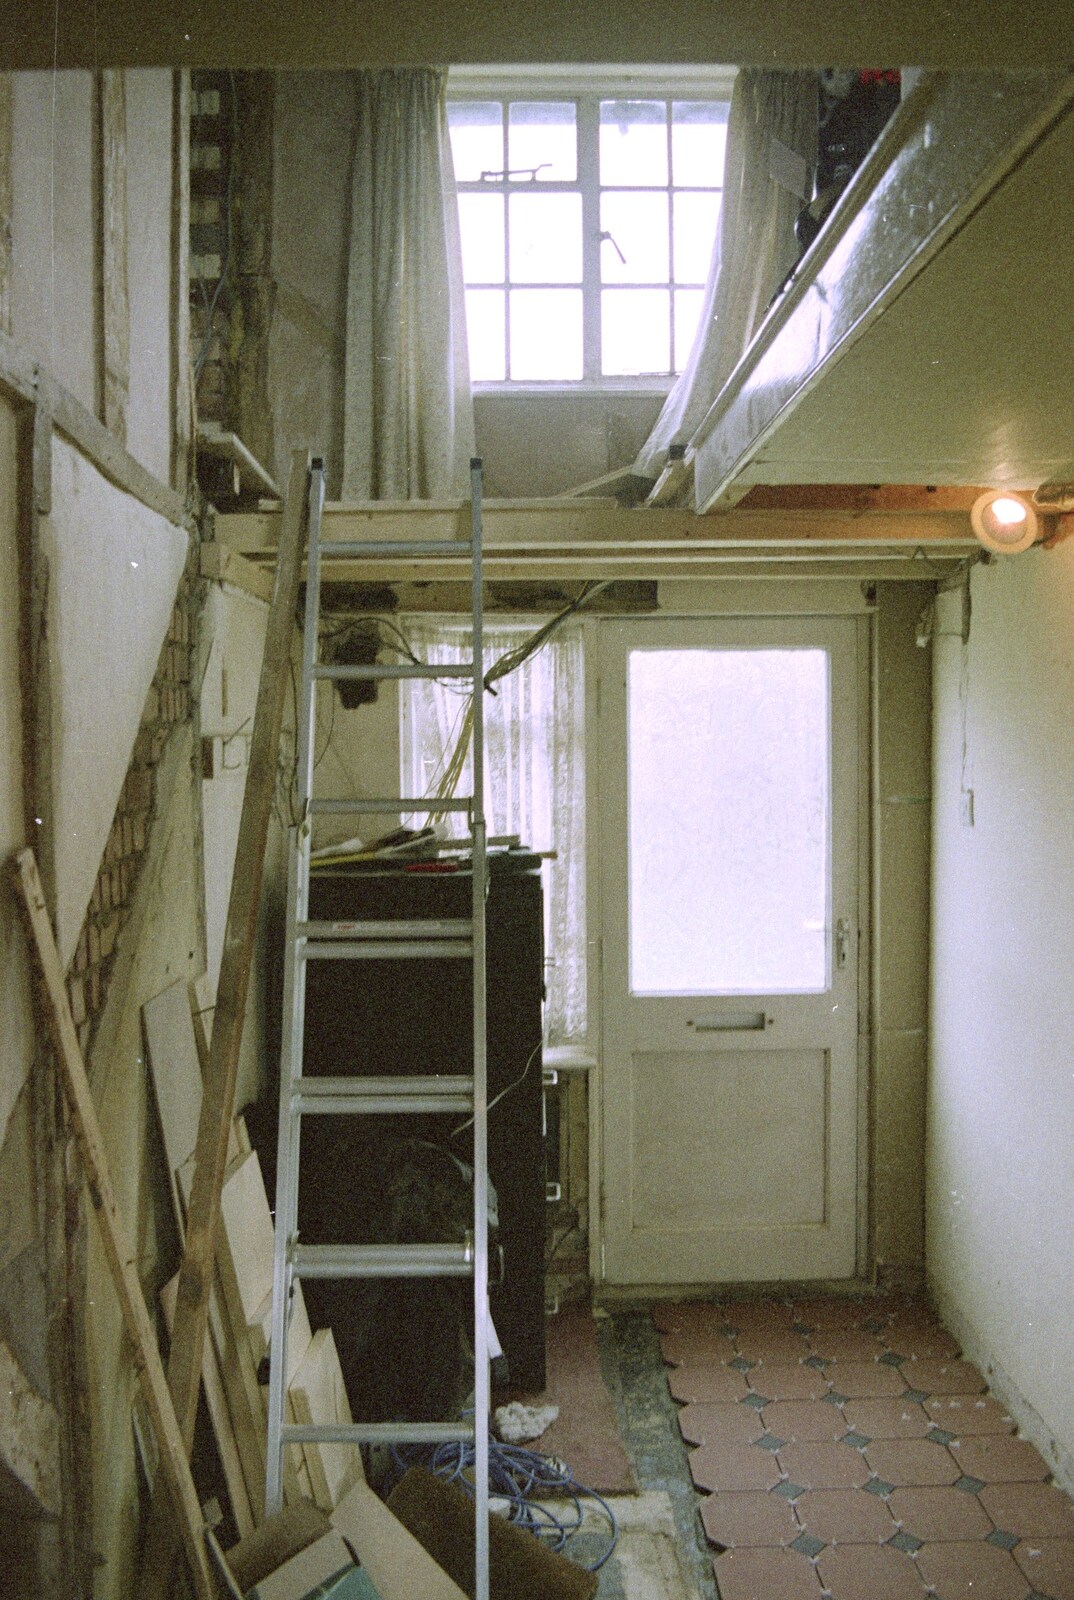 A view of upstairs from 3G Lab, and Building a Staircase, Brome, Suffolk - 11th February 2001